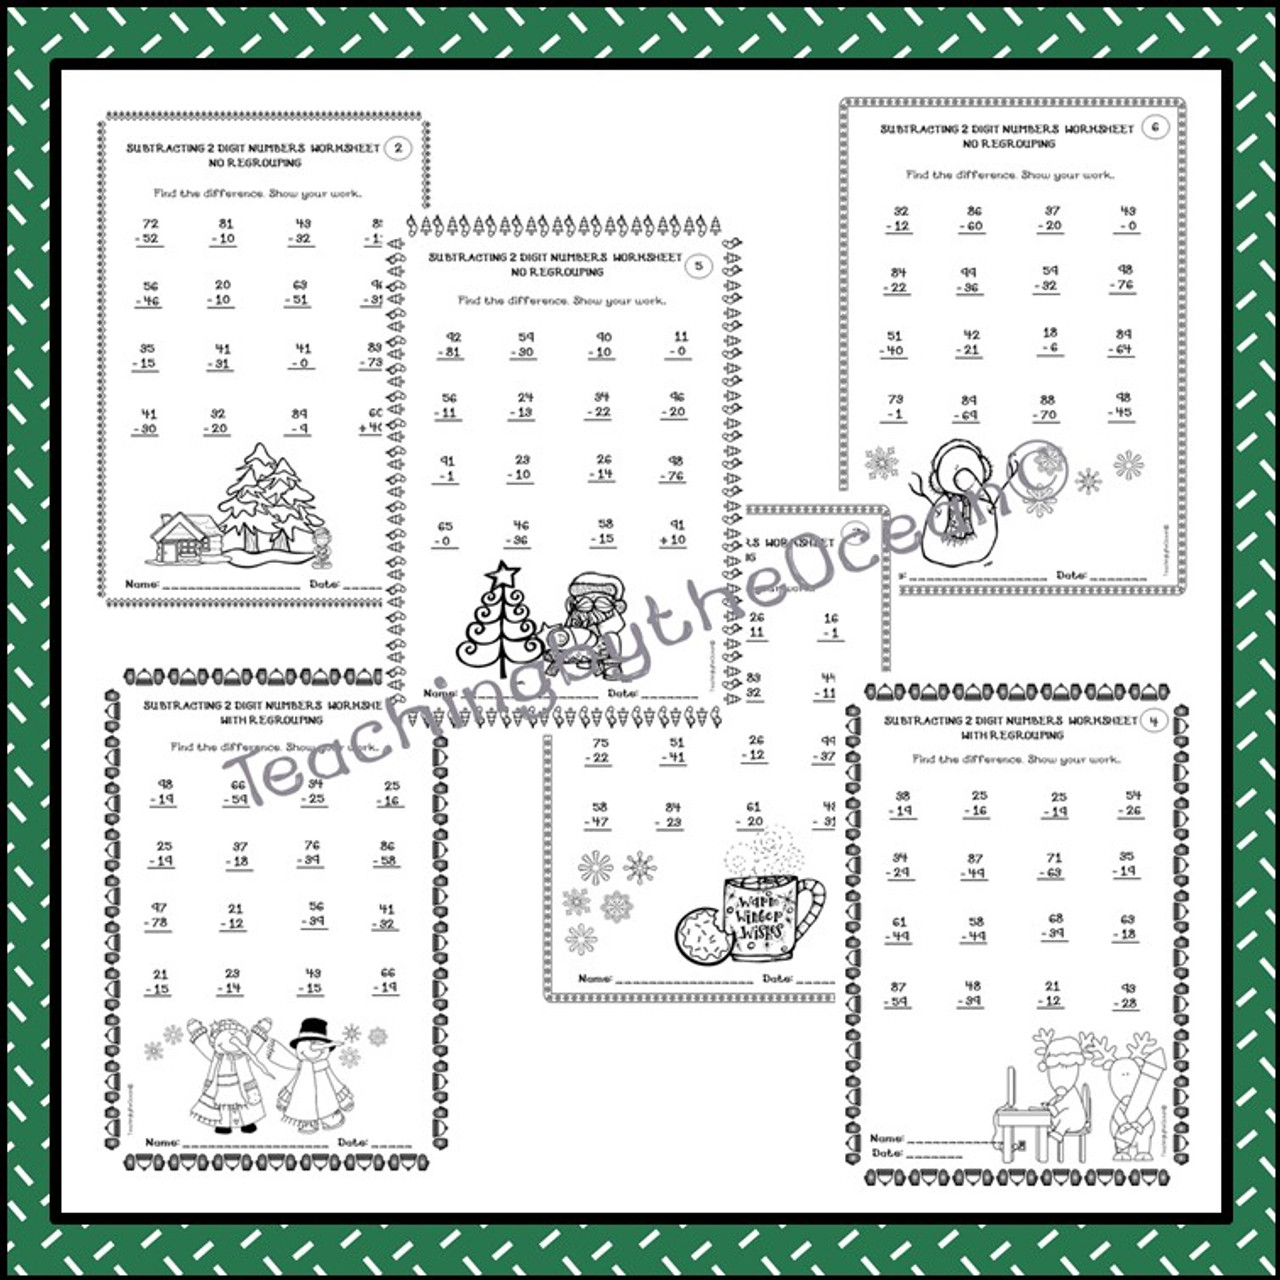 Subtracting 2 Digit Numbers Worksheets – Winter / Christmas Themed